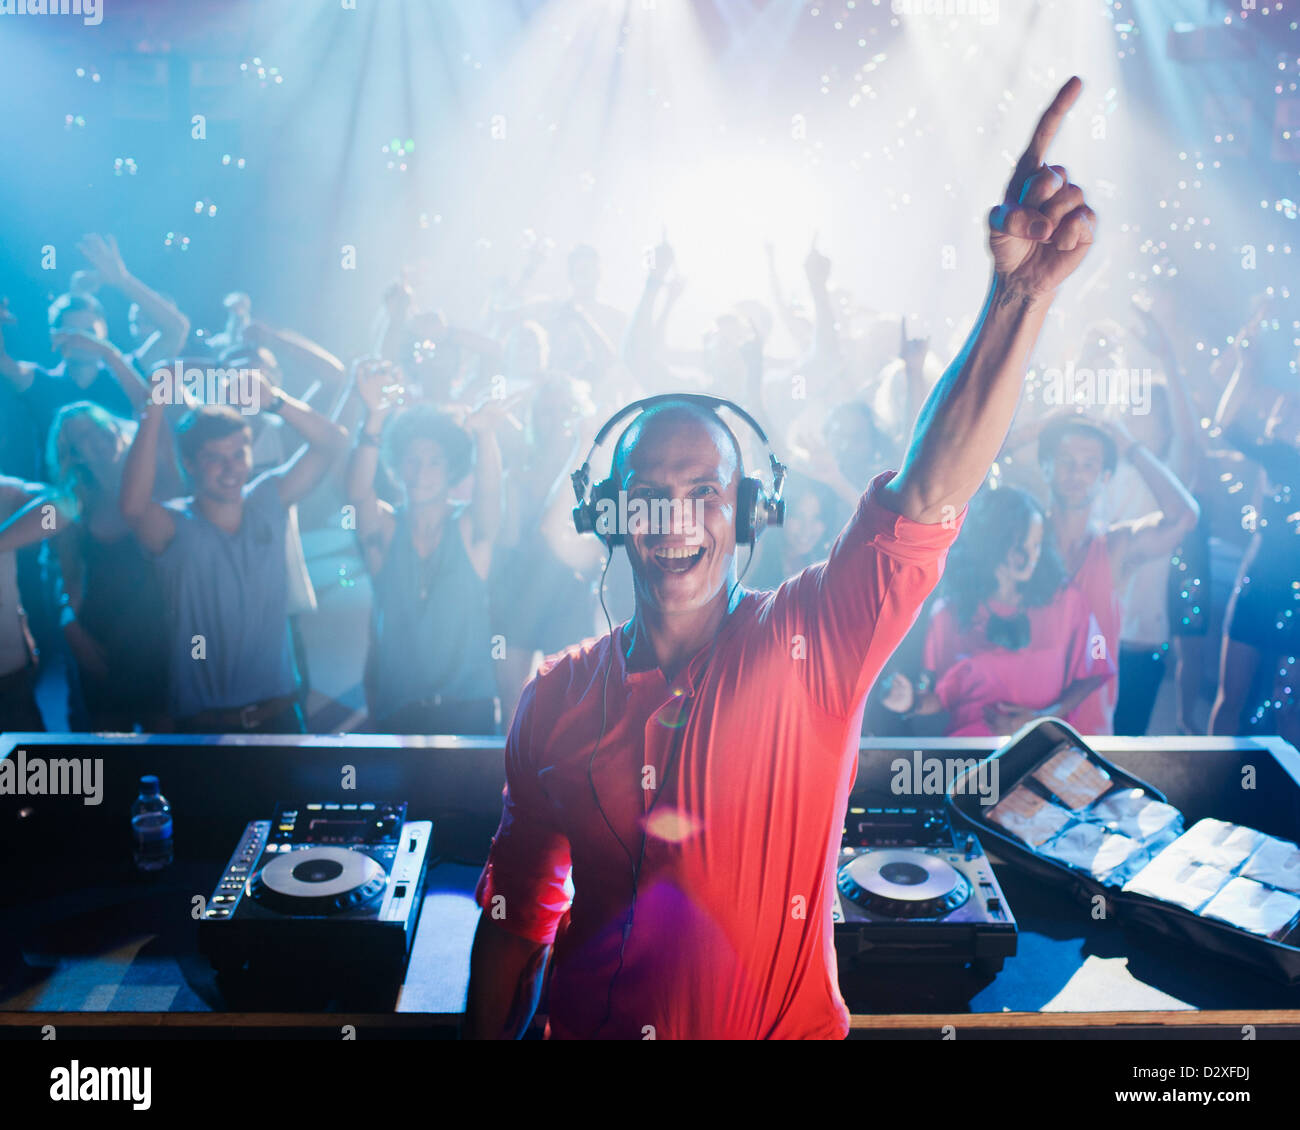 Portrait of enthusiastic DJ with arm raised and people on dance floor in background Stock Photo